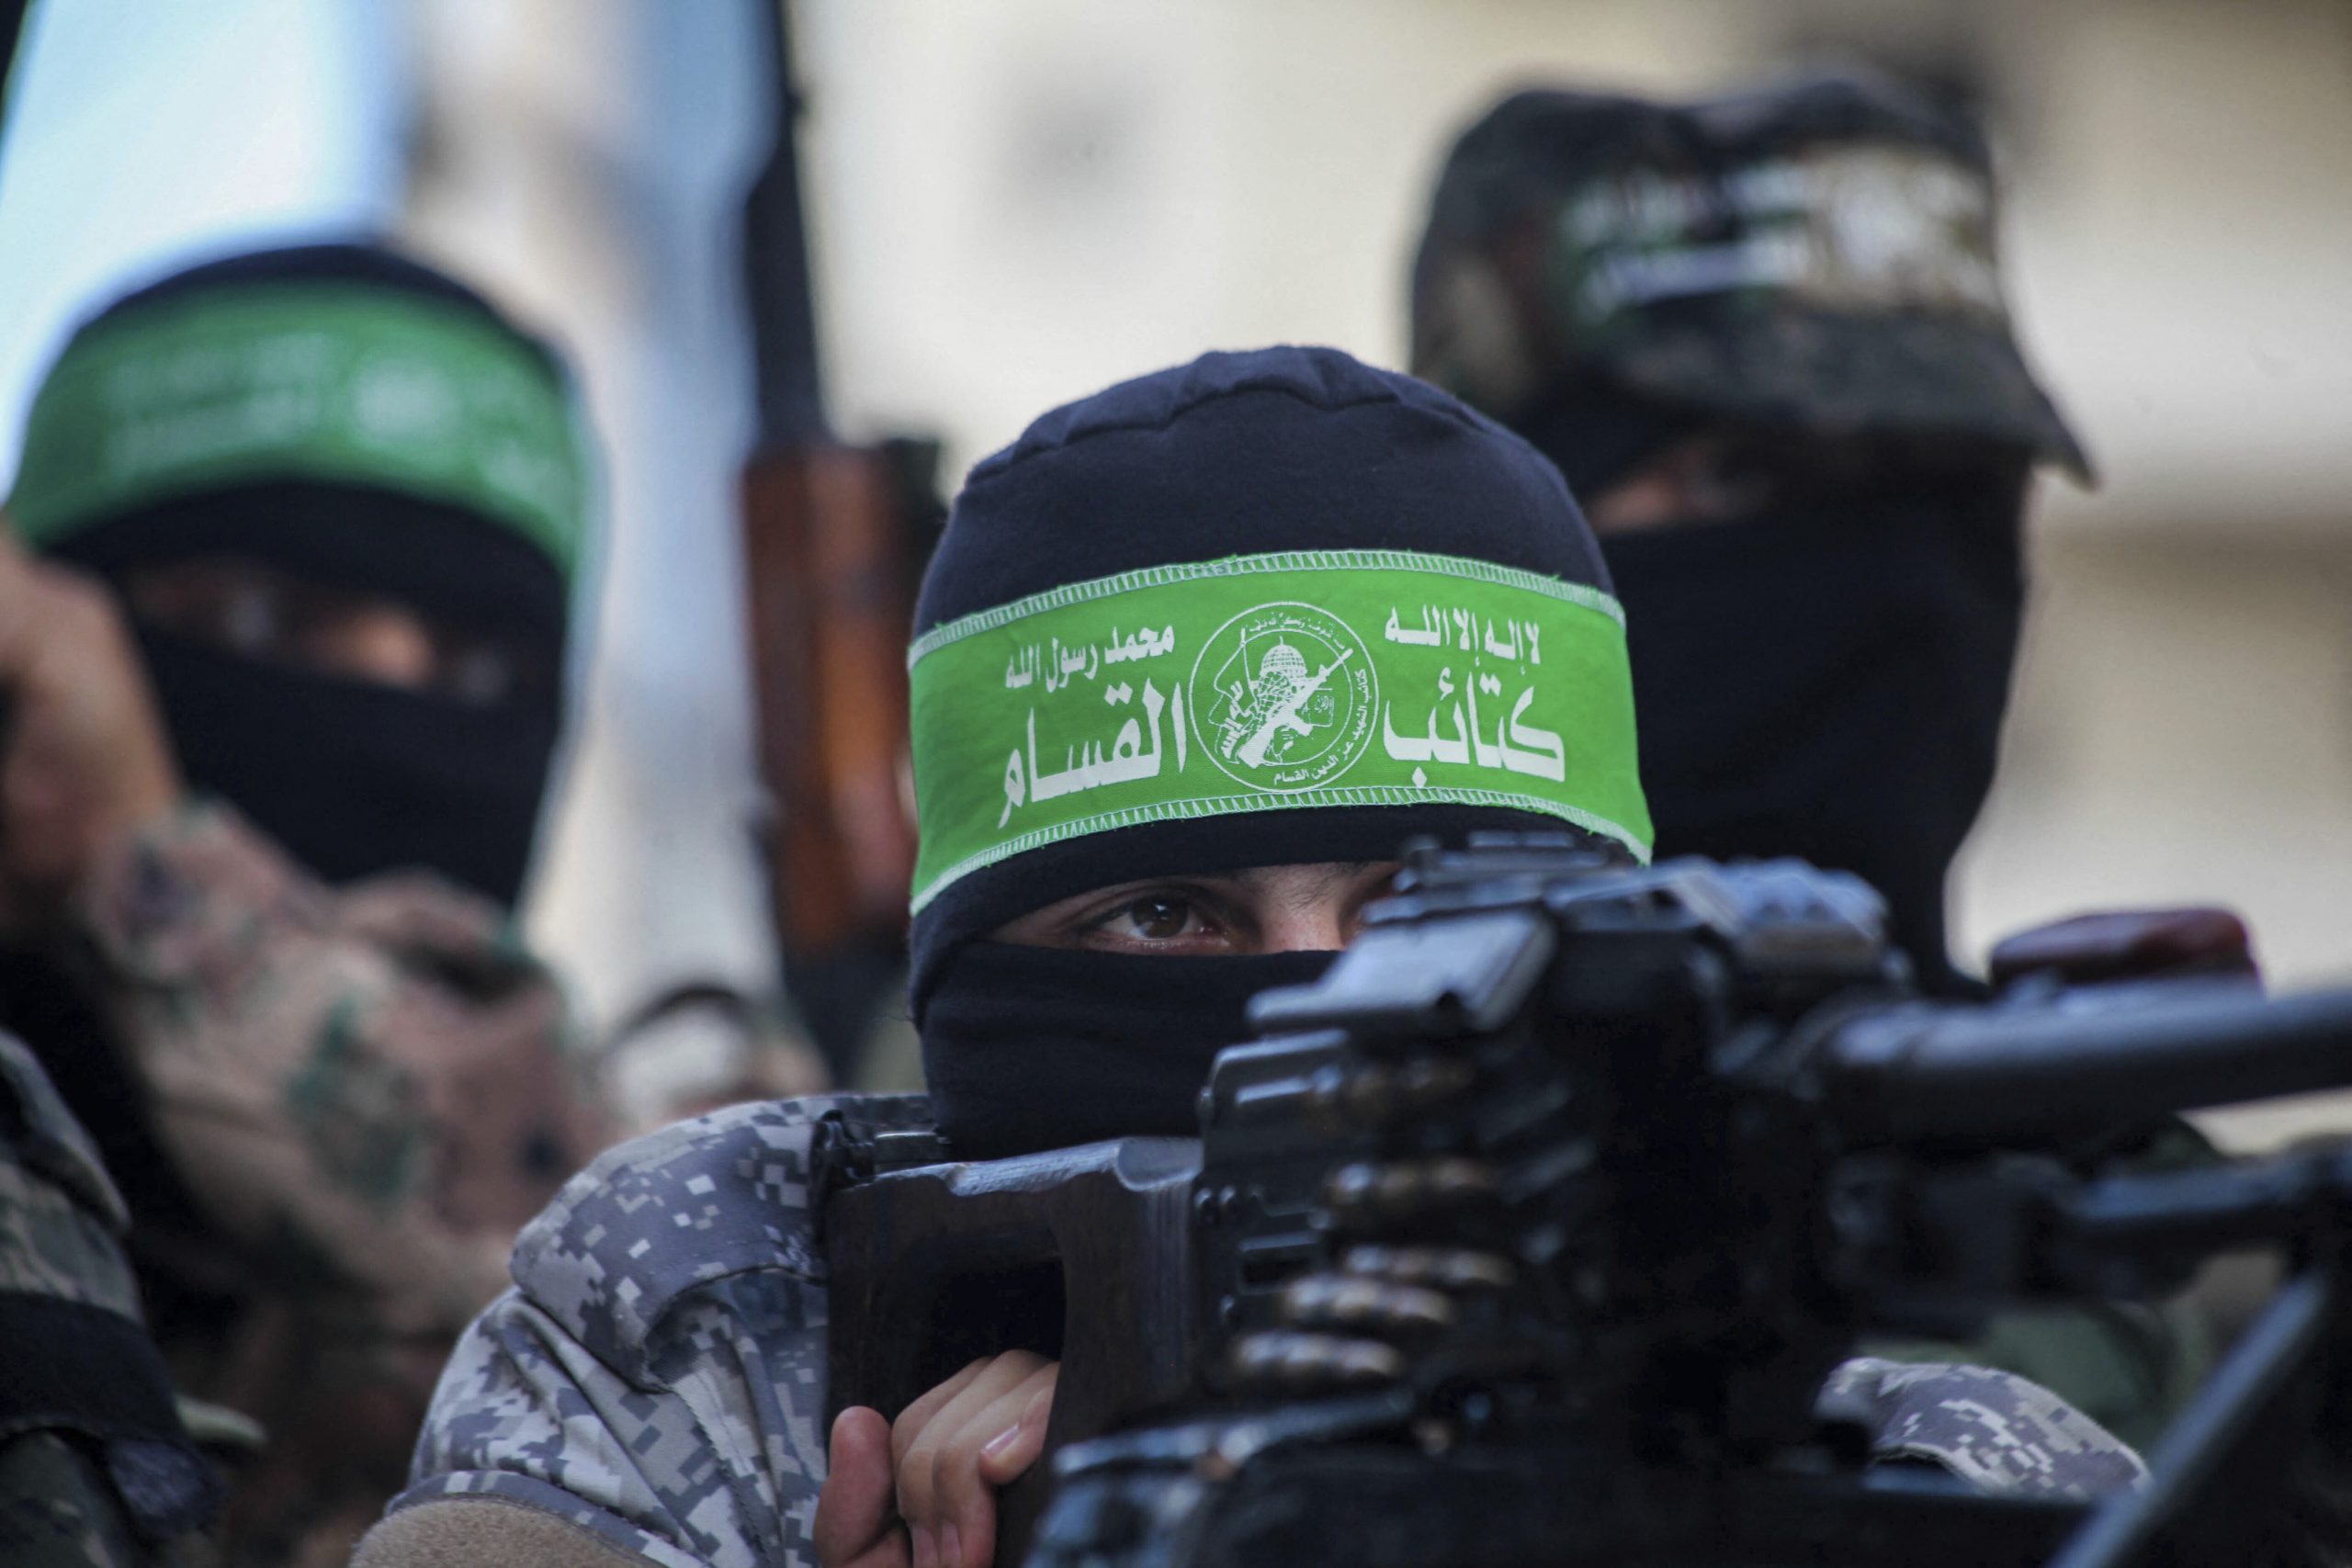 Hamas fighters at a rally in Gaza City following the group’s ceasefire with Israel. A recent survey identifies Palestinian society as the world’s most anti-Semitic, and Muslim states in the Middle East rank uniformly as global hotbeds of “extremely anti-Semitic” attitudes.